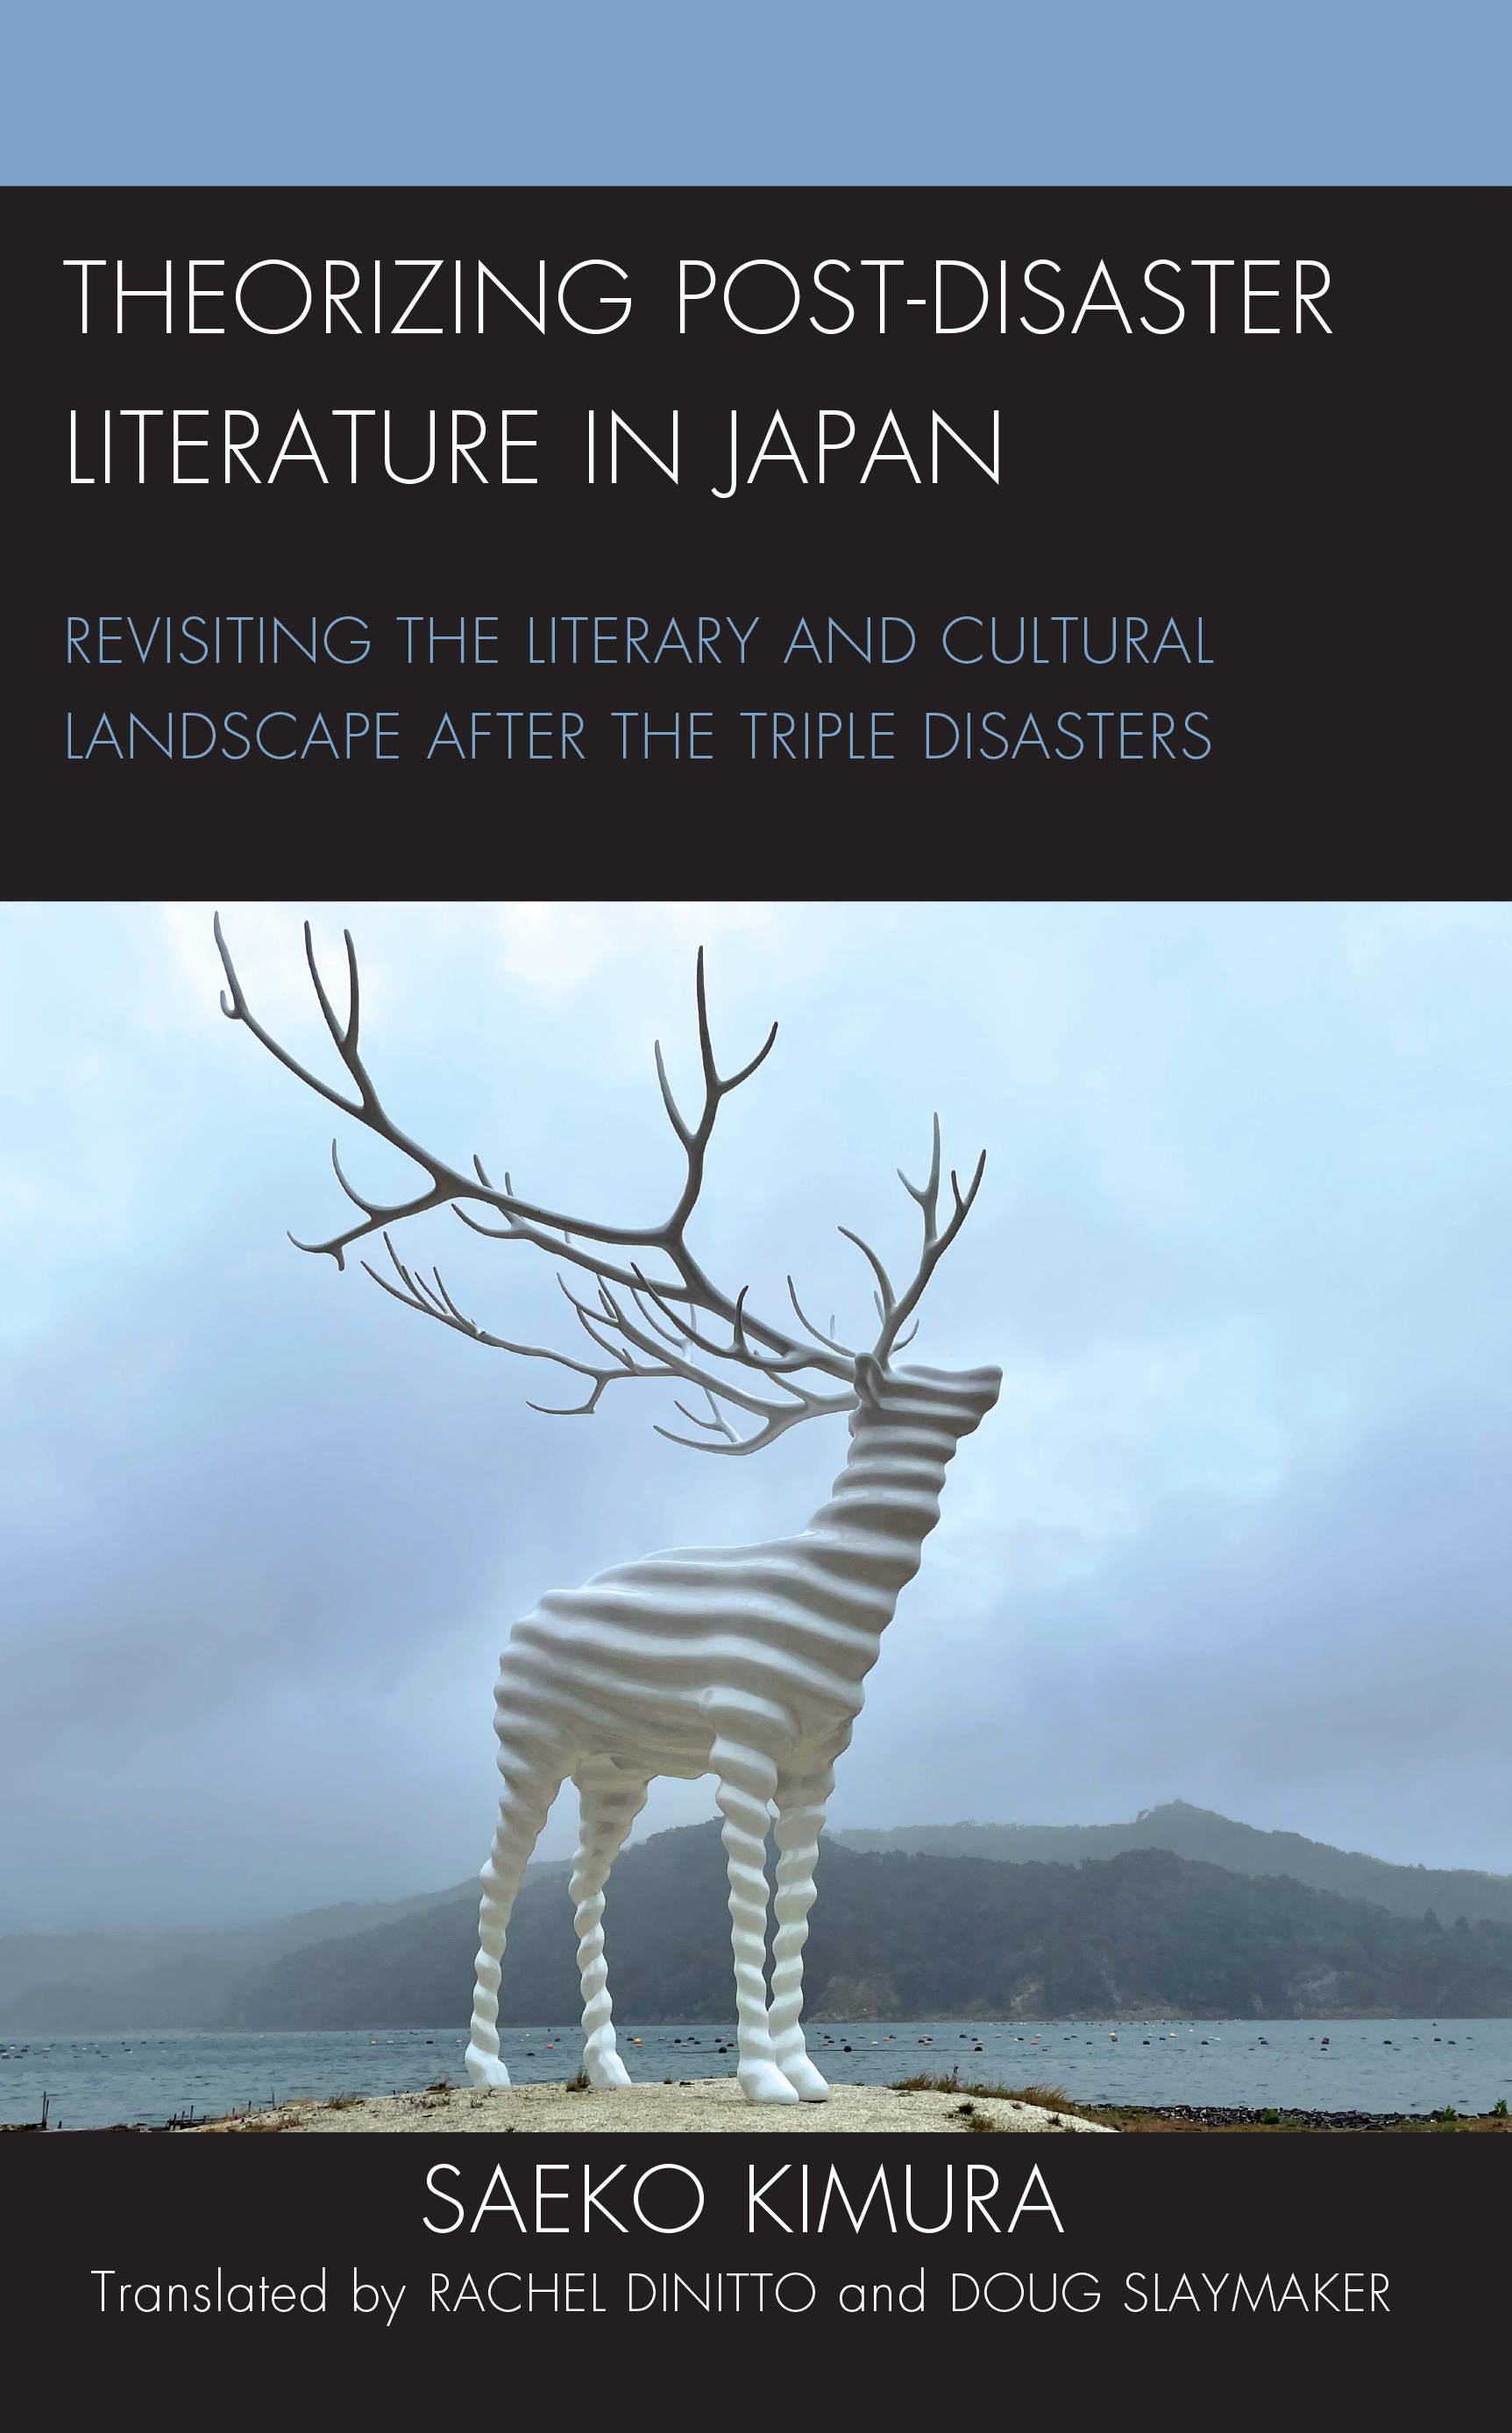 Theorizing Post-Disaster Literature in Japan: Revisiting the Literary and Cultural Landscape after the Triple Disasters